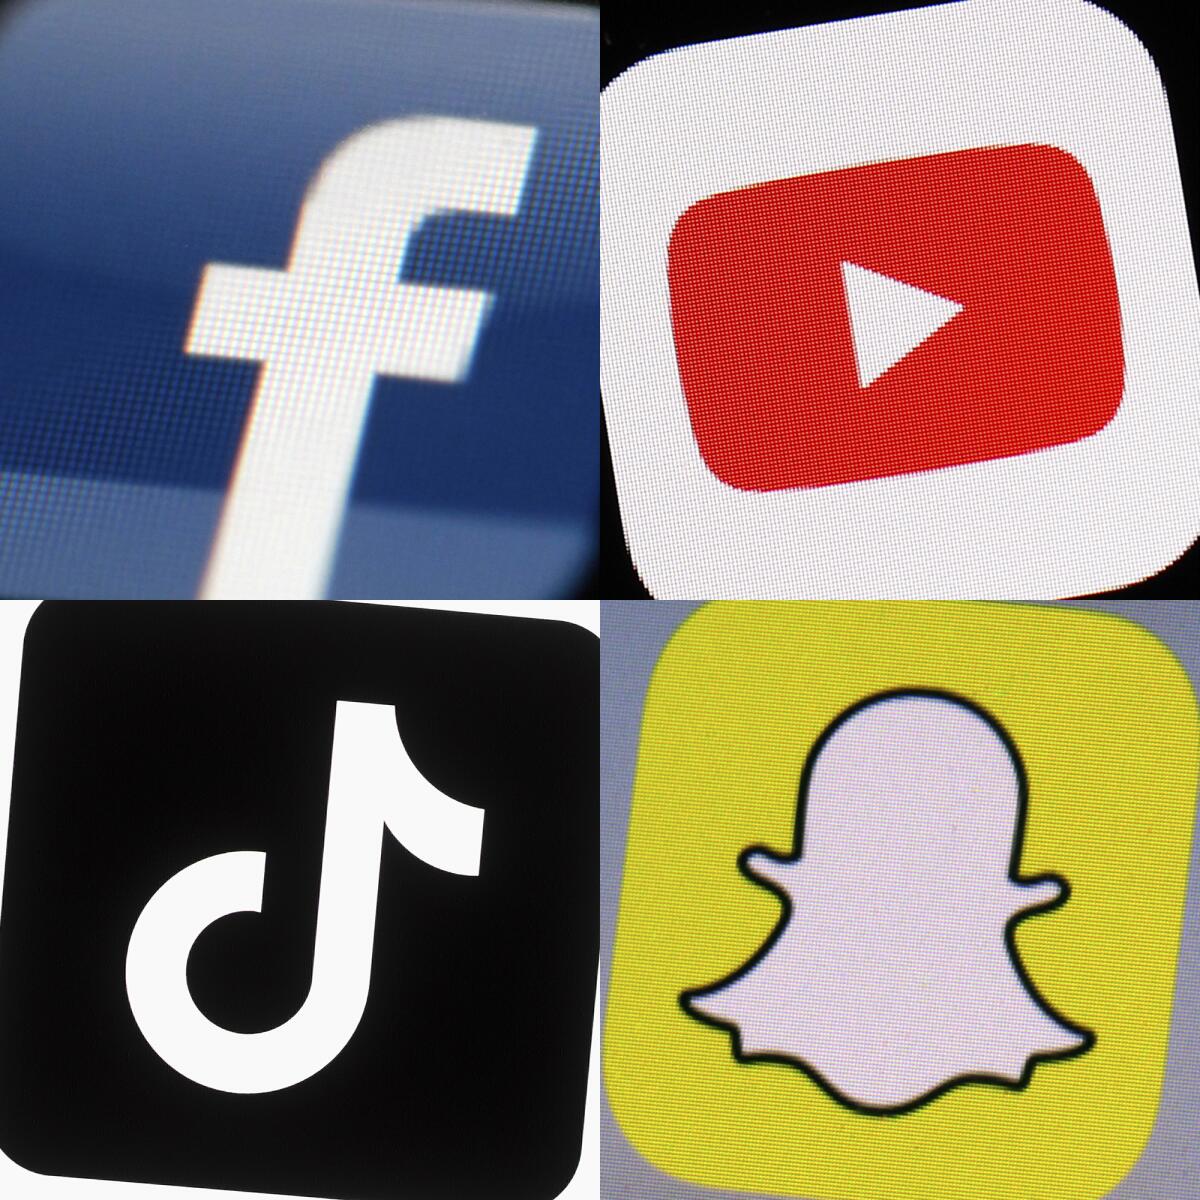 A collage of social media icons